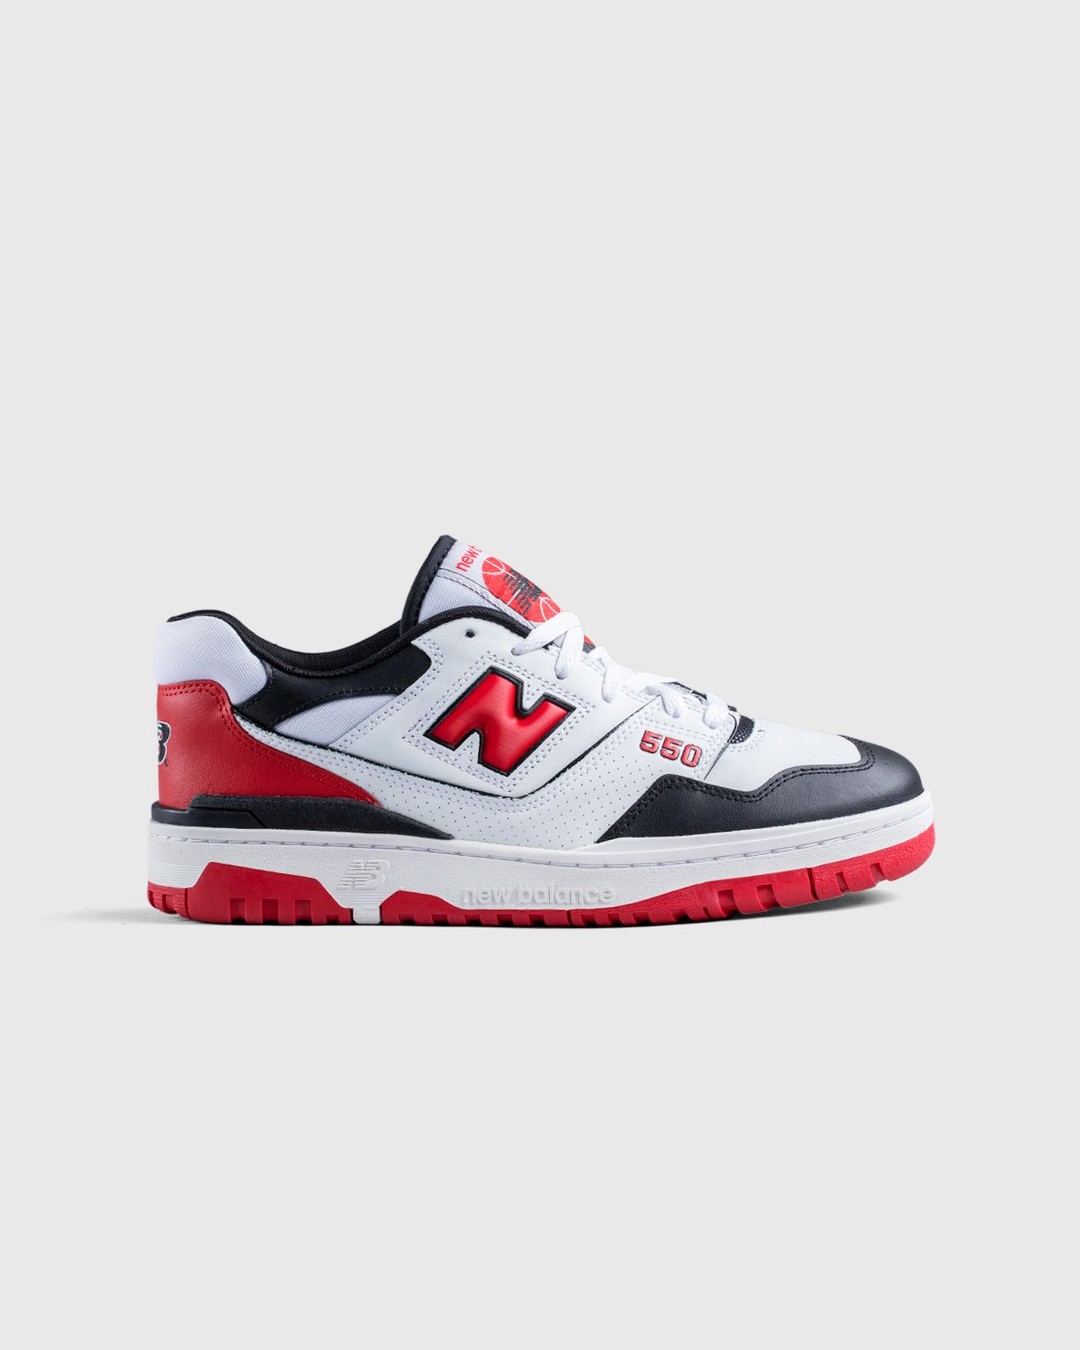 New Balance – BB550HR1 White Red Black - Sneakers - White - Image 1